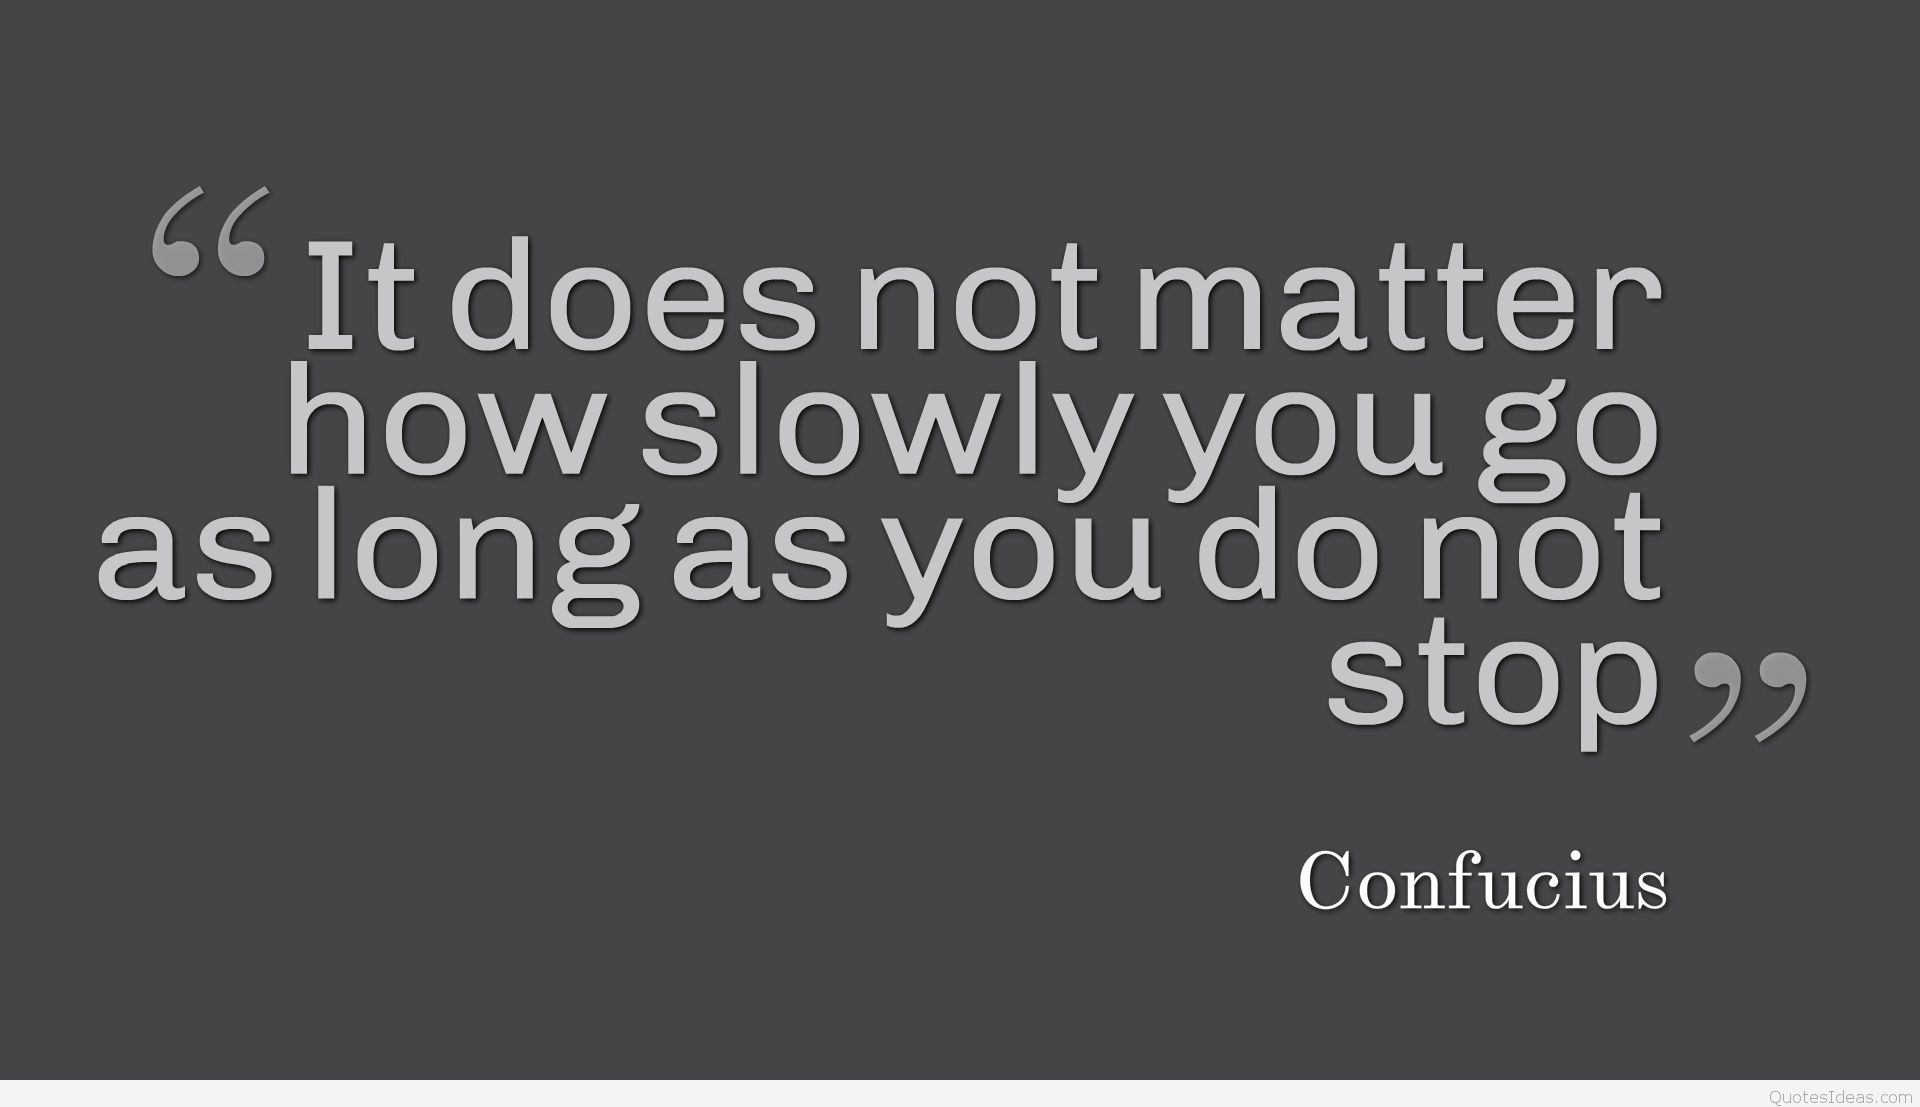 It does not matter how slowly you go as long as you do not stop. Confucius